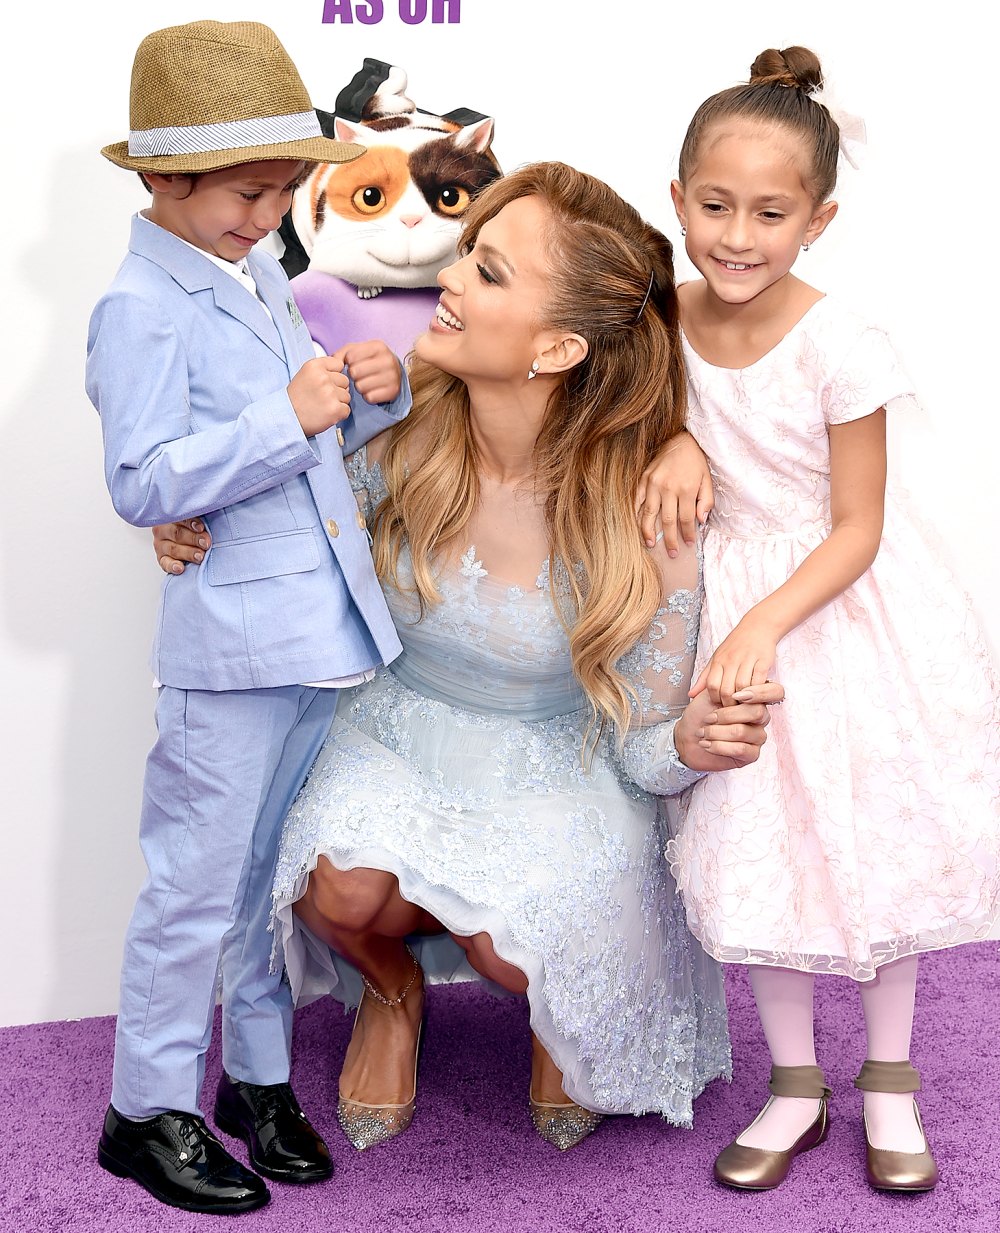 Jennifer Lopez (C) with daughter Emme (R) and son Max attends the premiere of Twentieth Century Fox And Dreamworks Animation's "HOME" at Regency Village Theatre on March 22, 2015 in Westwood, California.